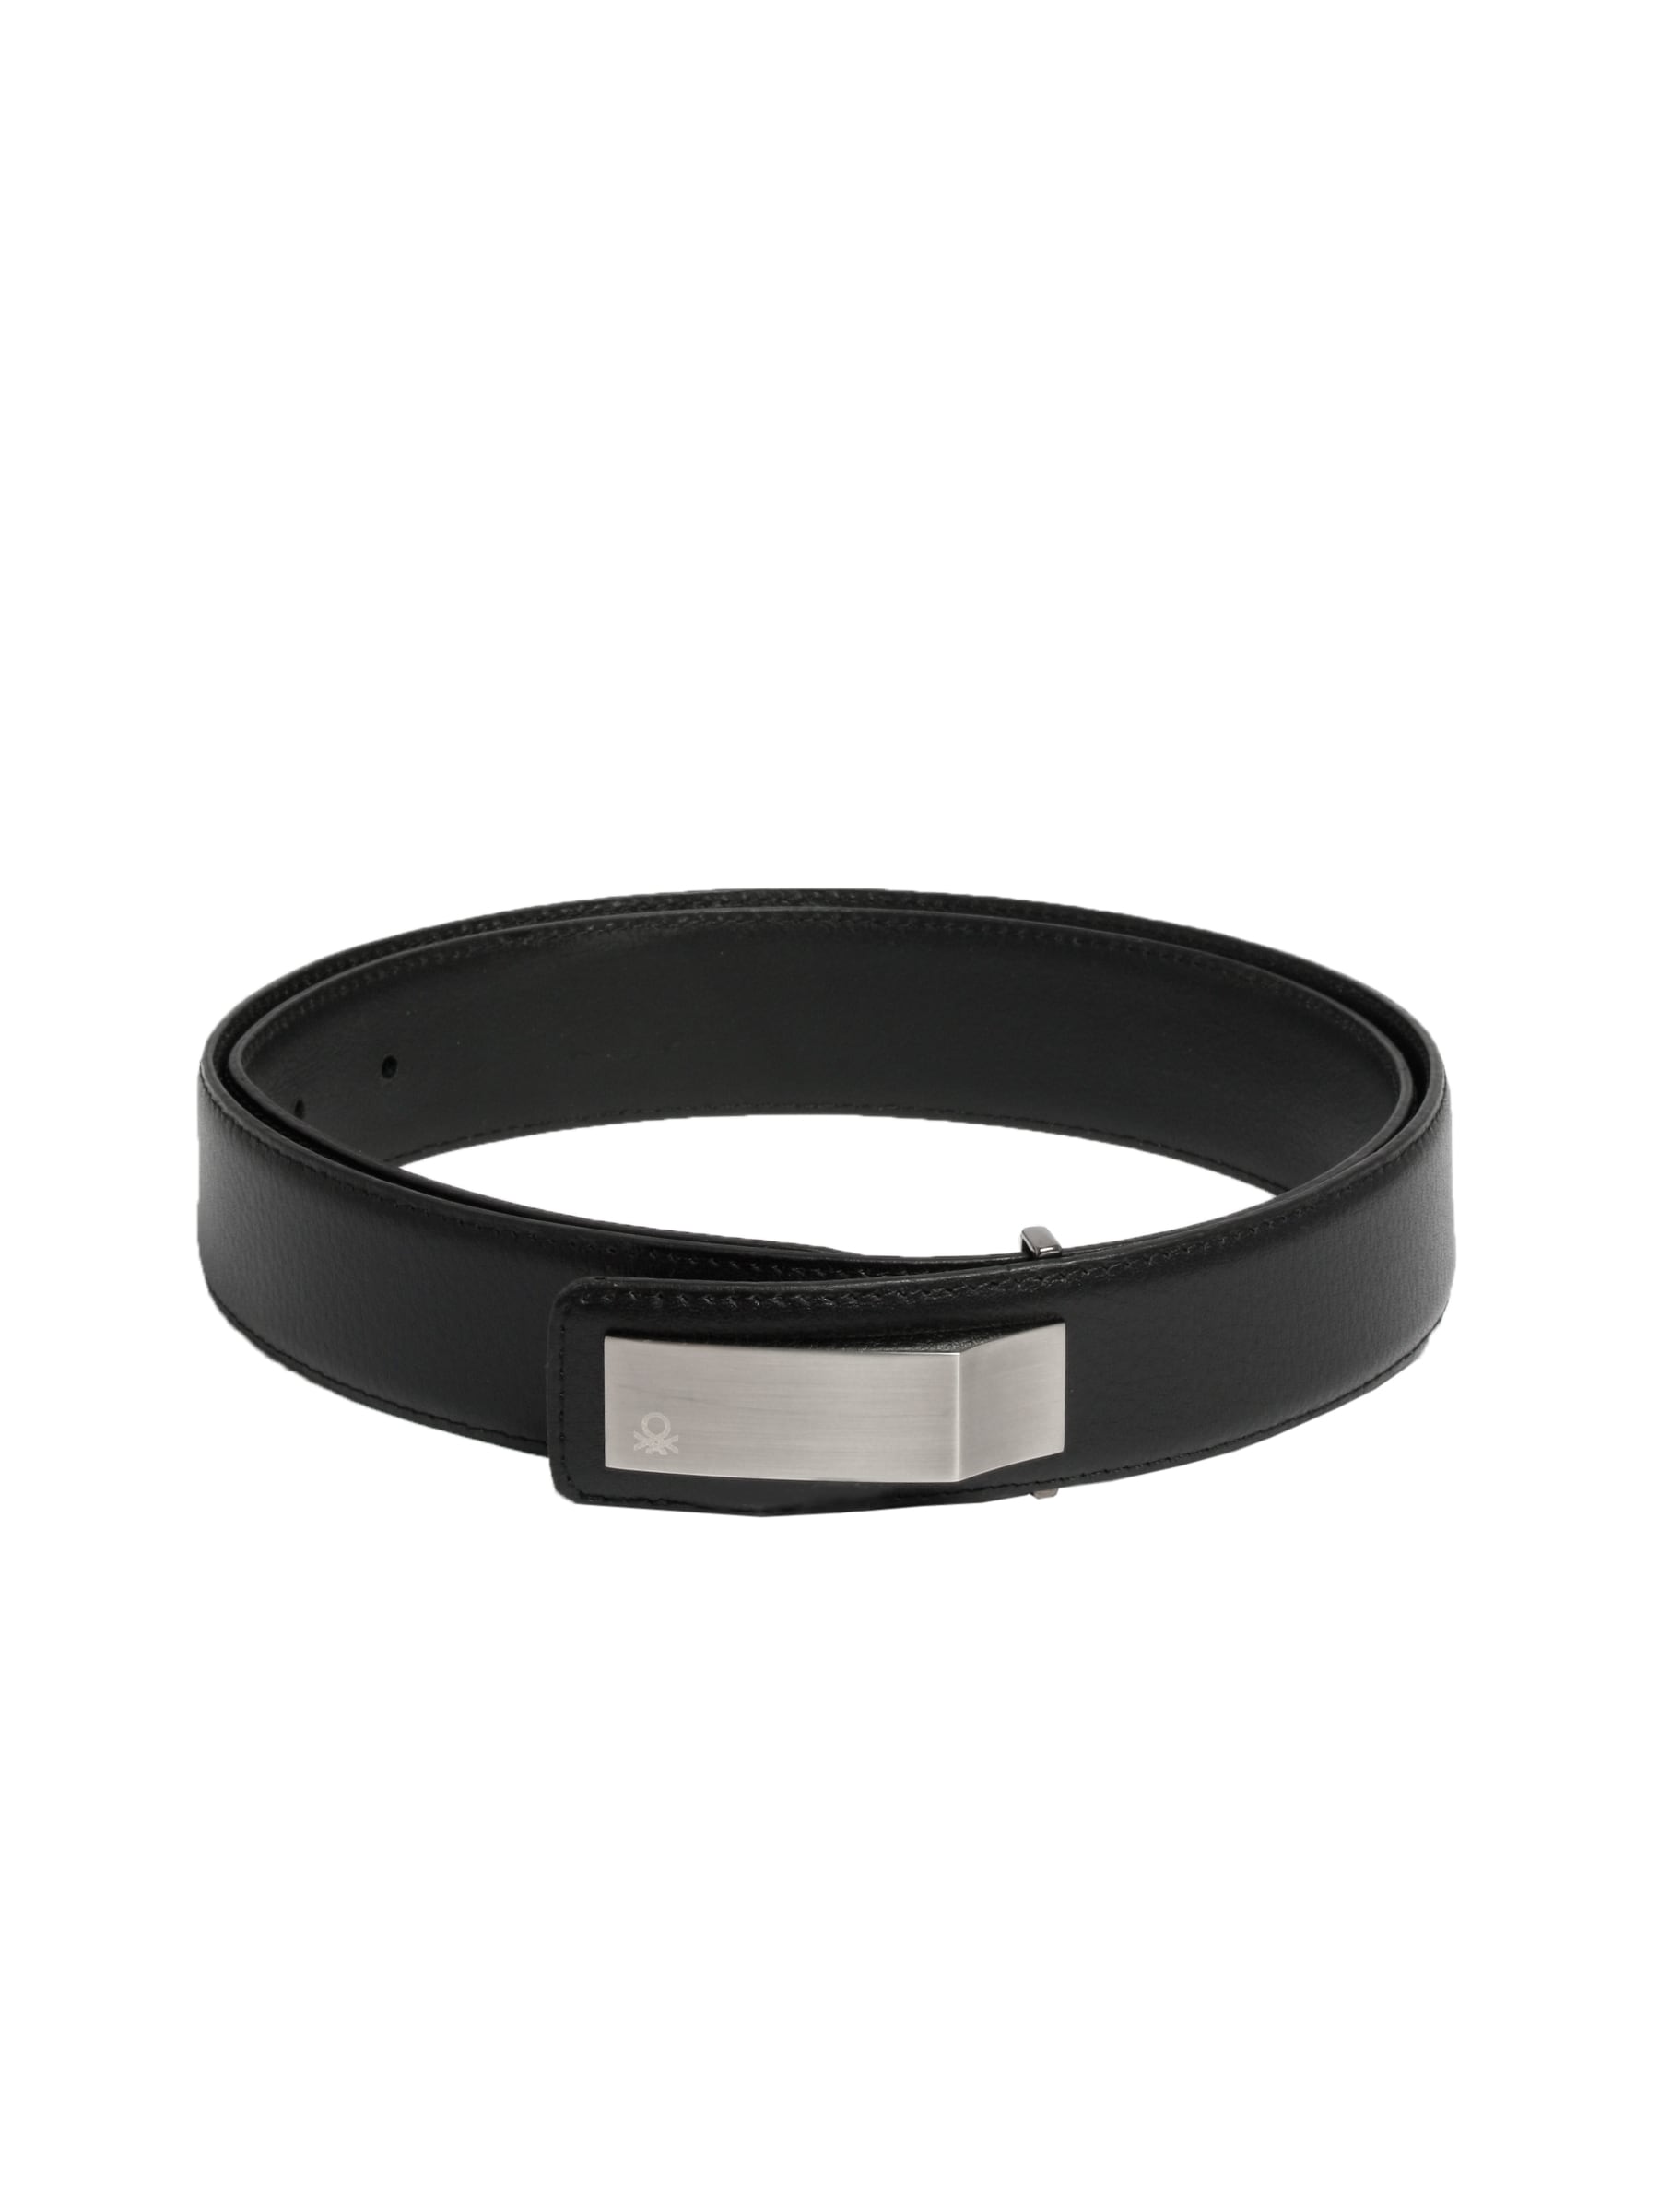 United Colors of Benetton Solid Belt